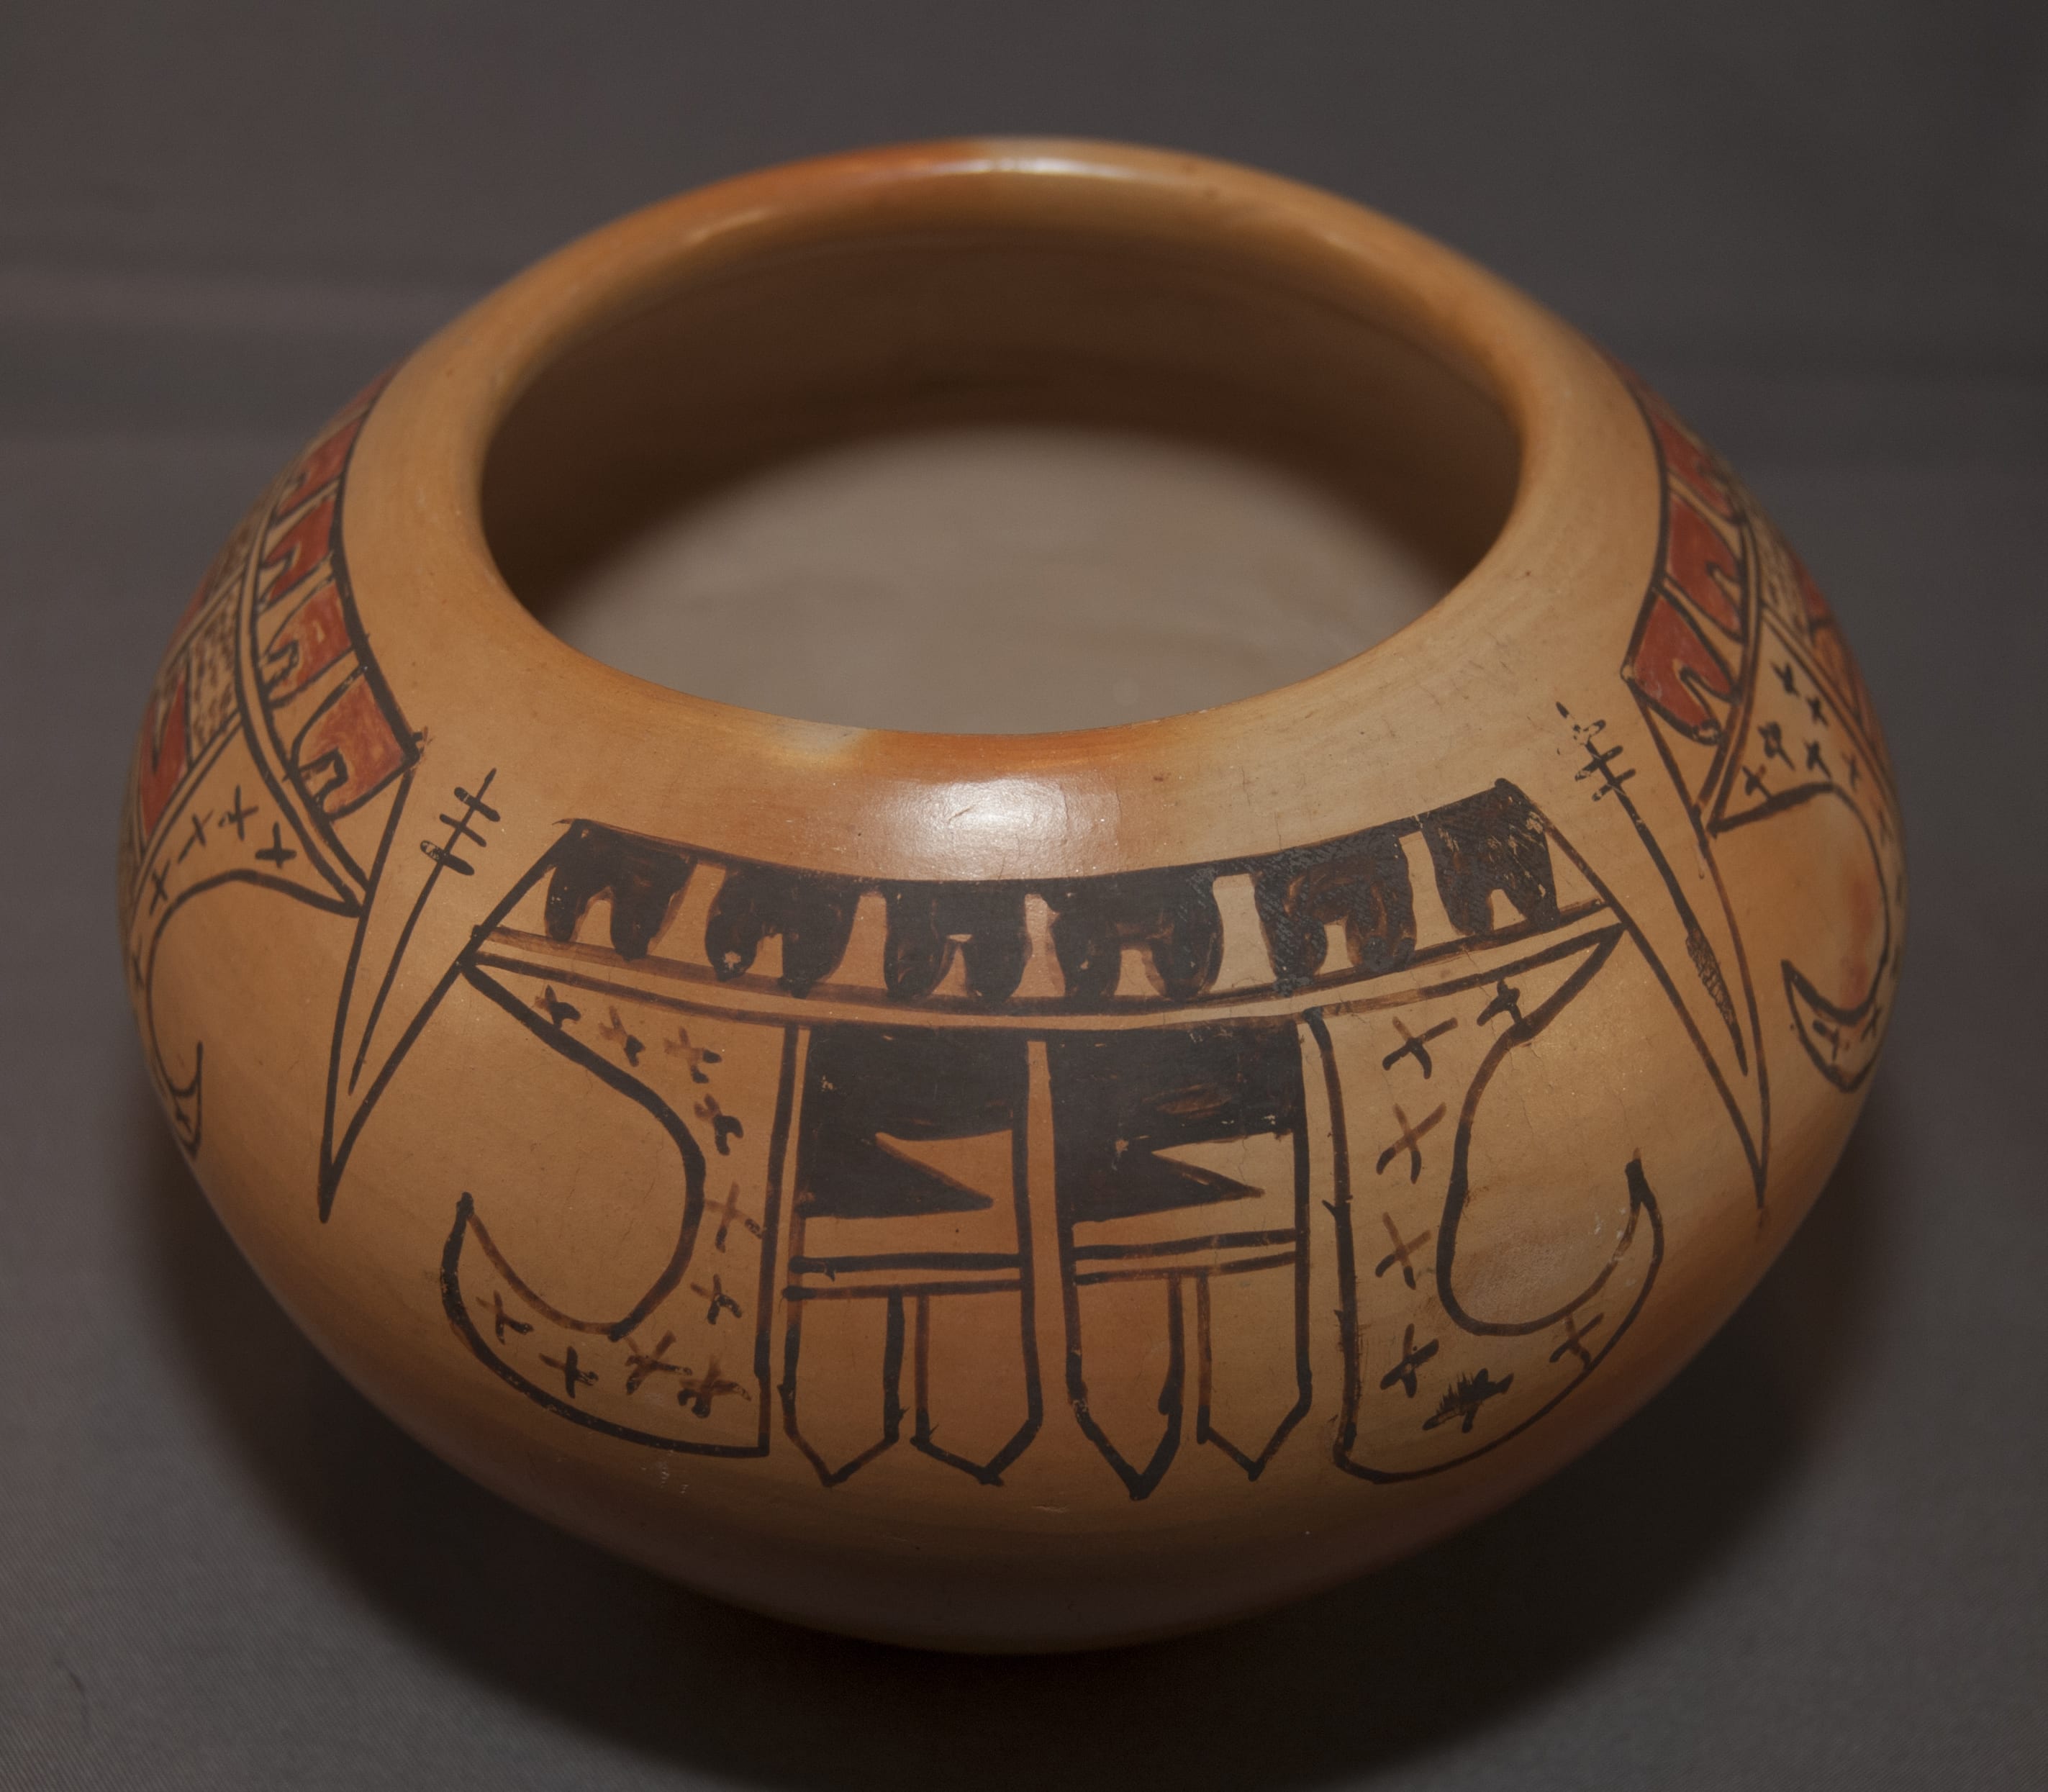 2011-20 Jar with Crude Rendition of Eagle Tail Design